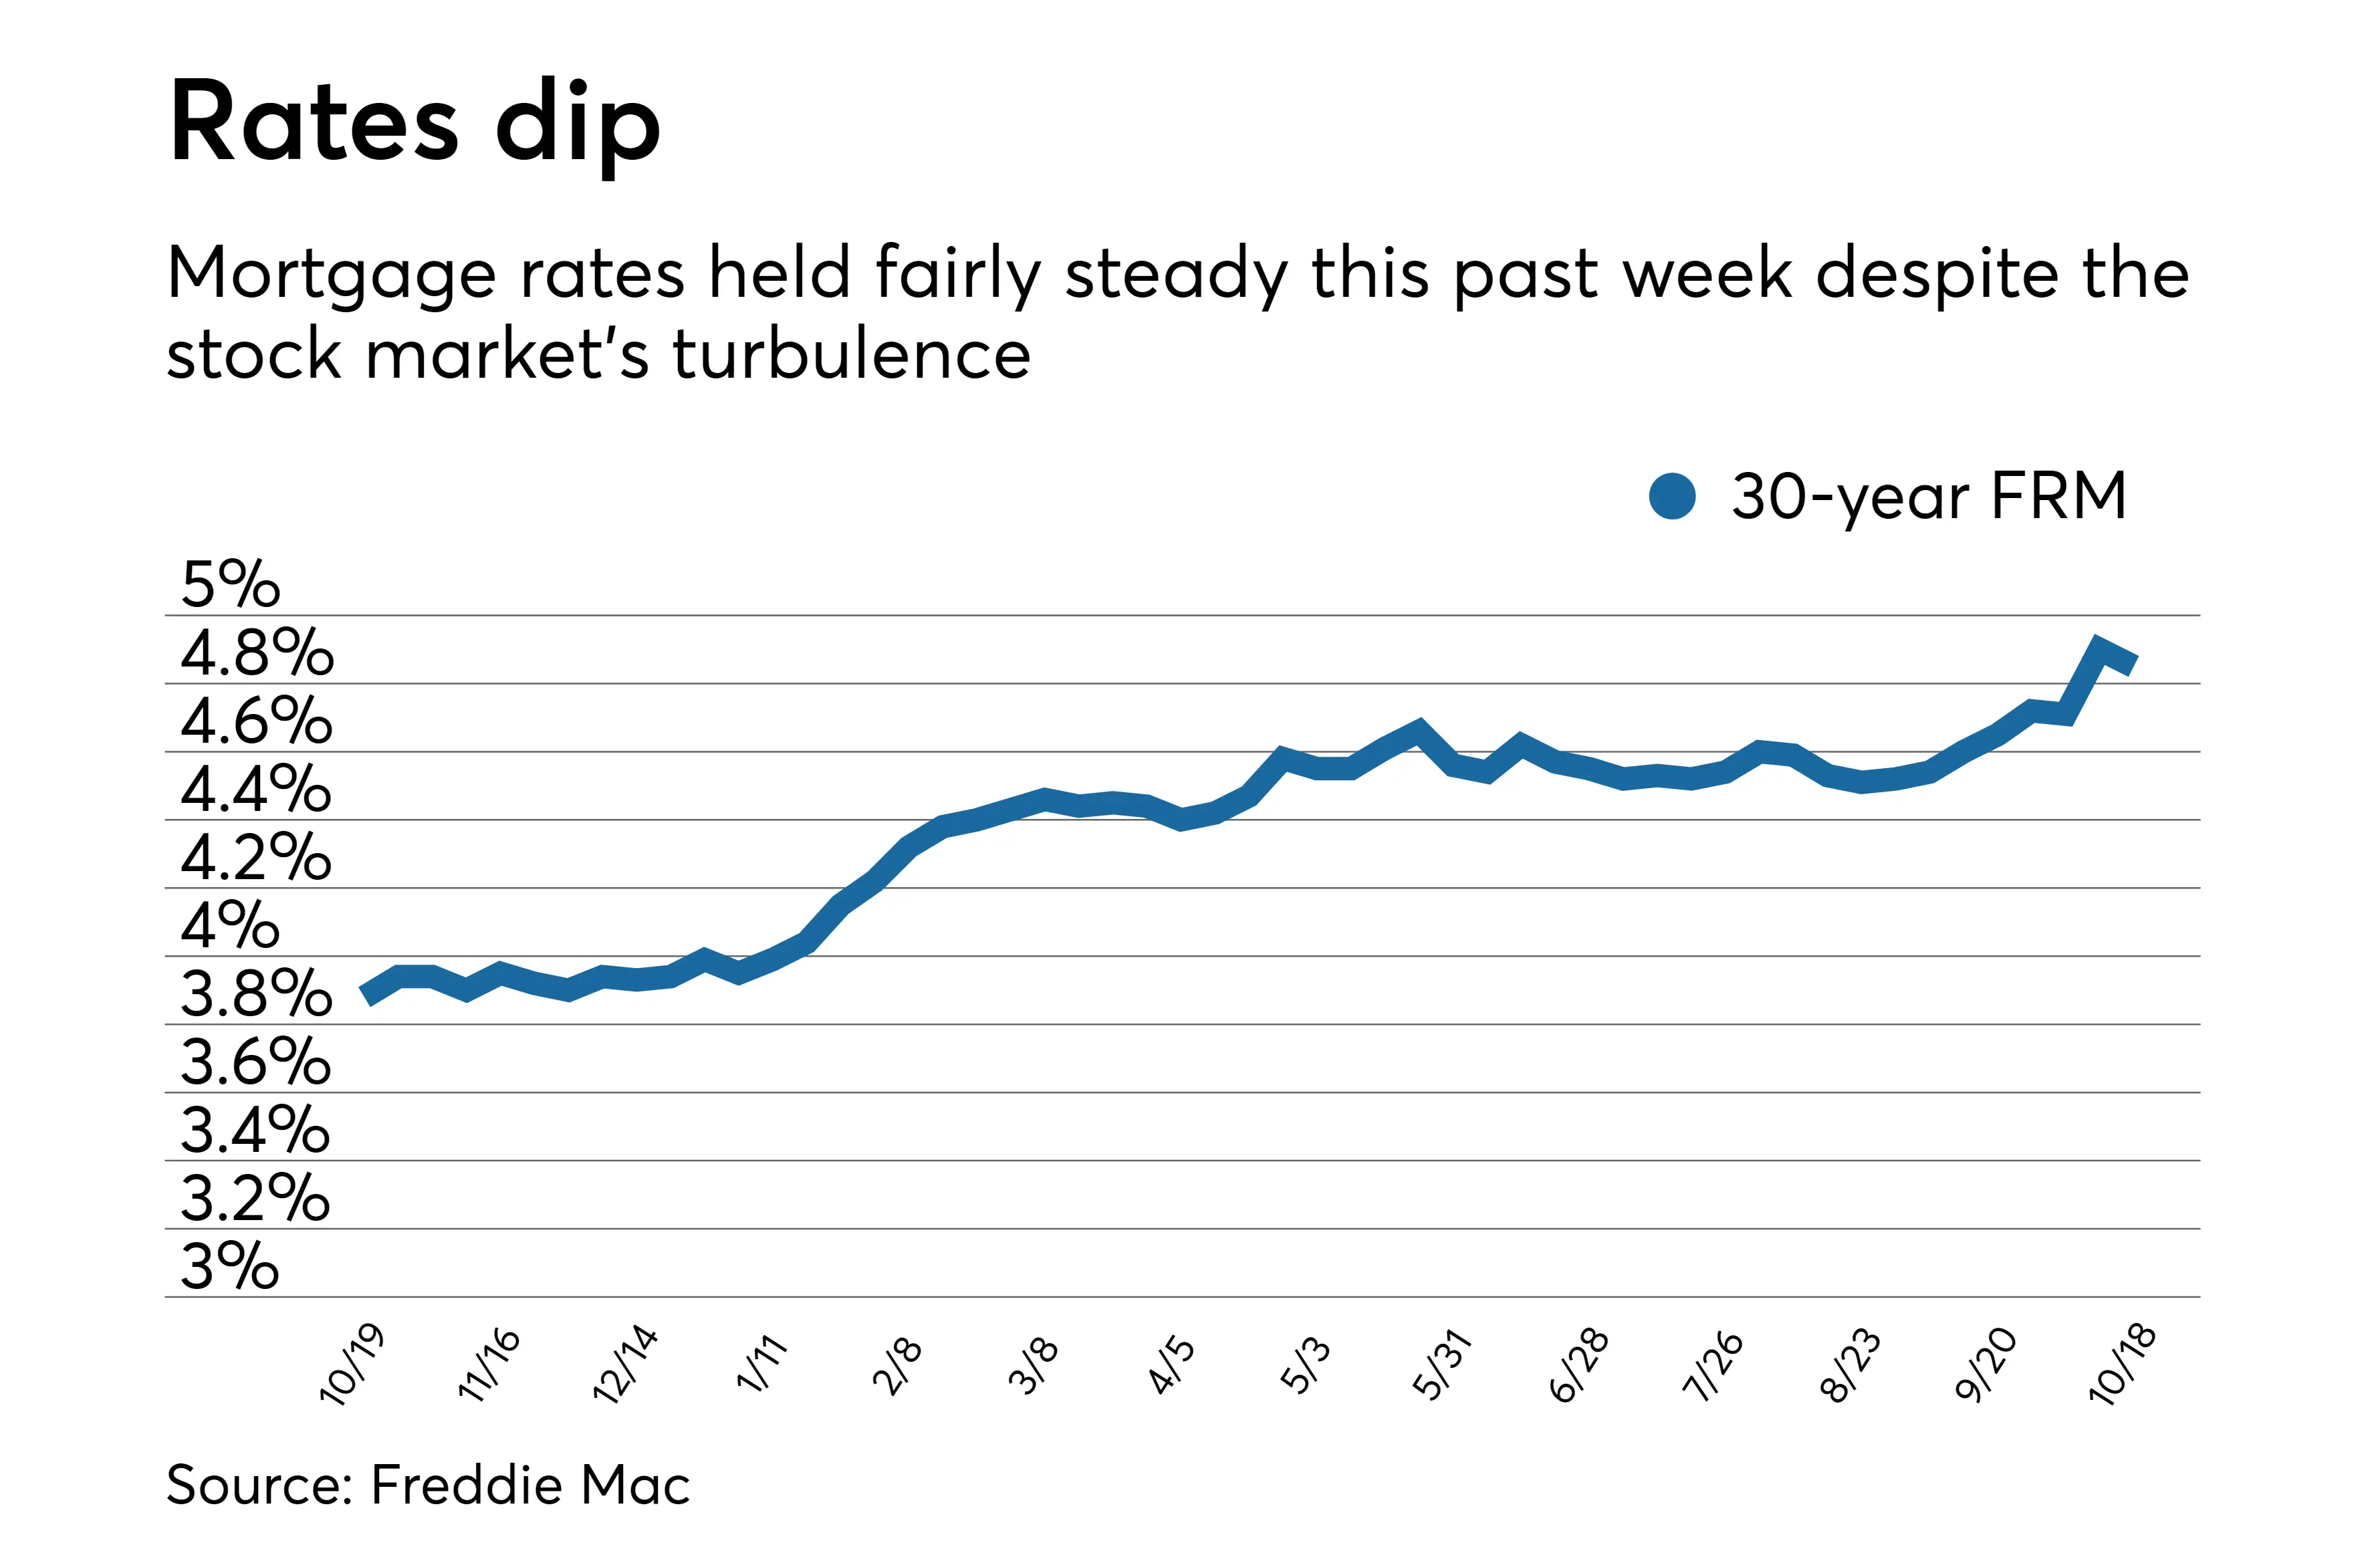 Average mortgage rates decline, at least for one week